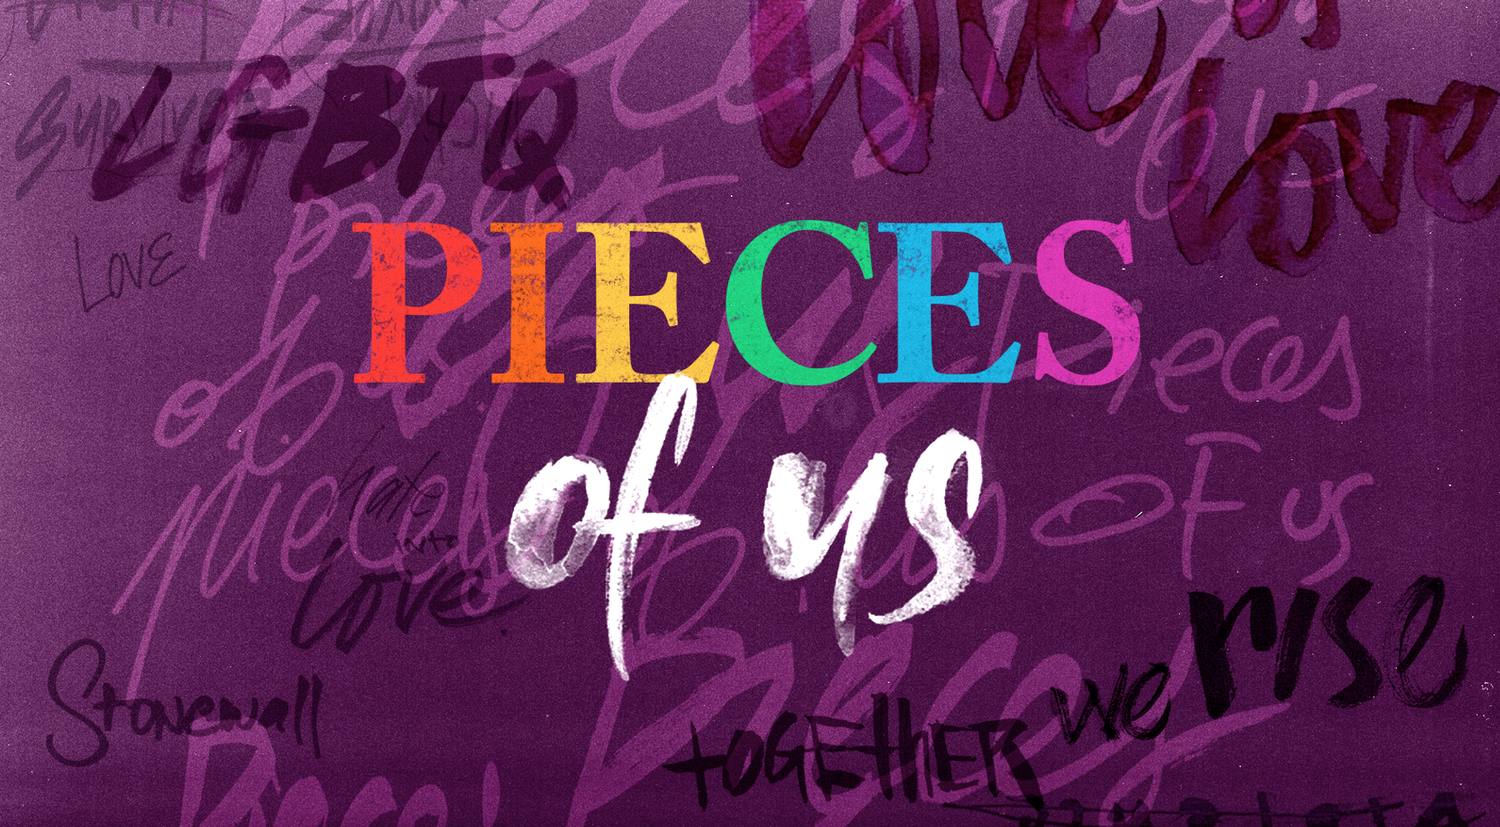 Watch Pieces of Us